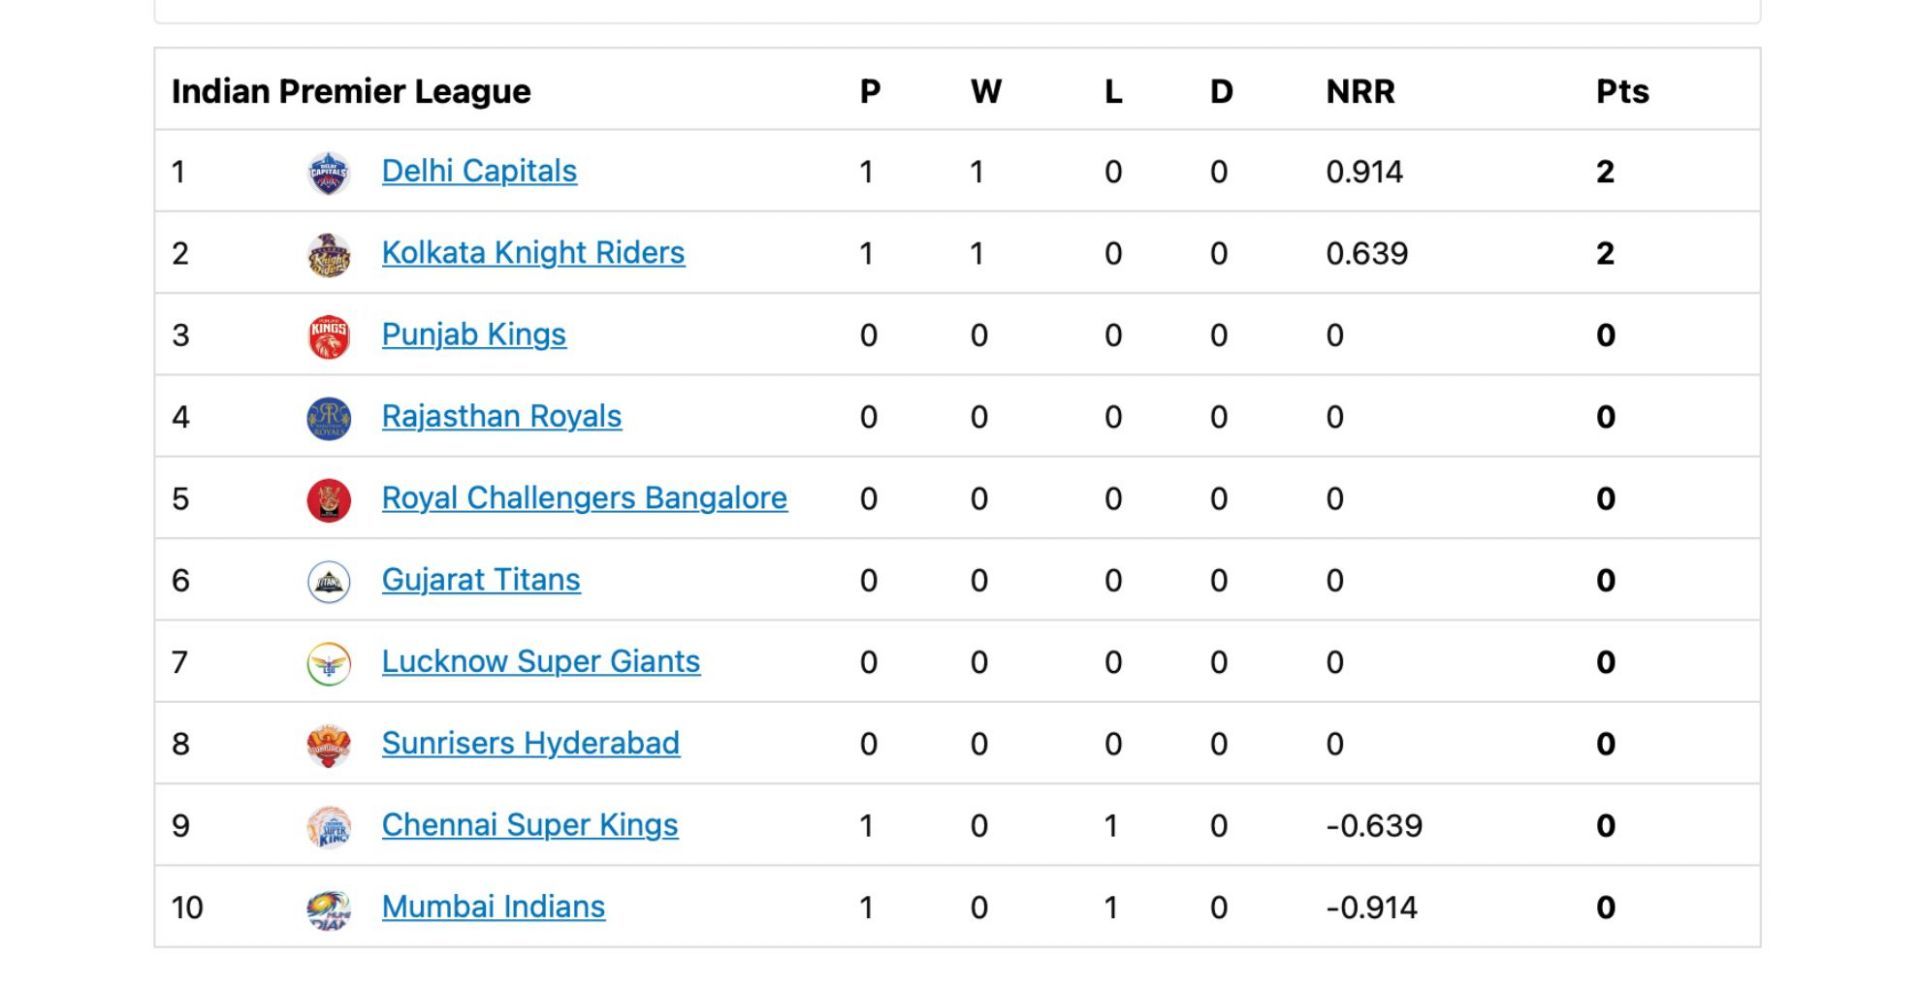 Delhi Capitals go to the top of the IPL 2022 points table